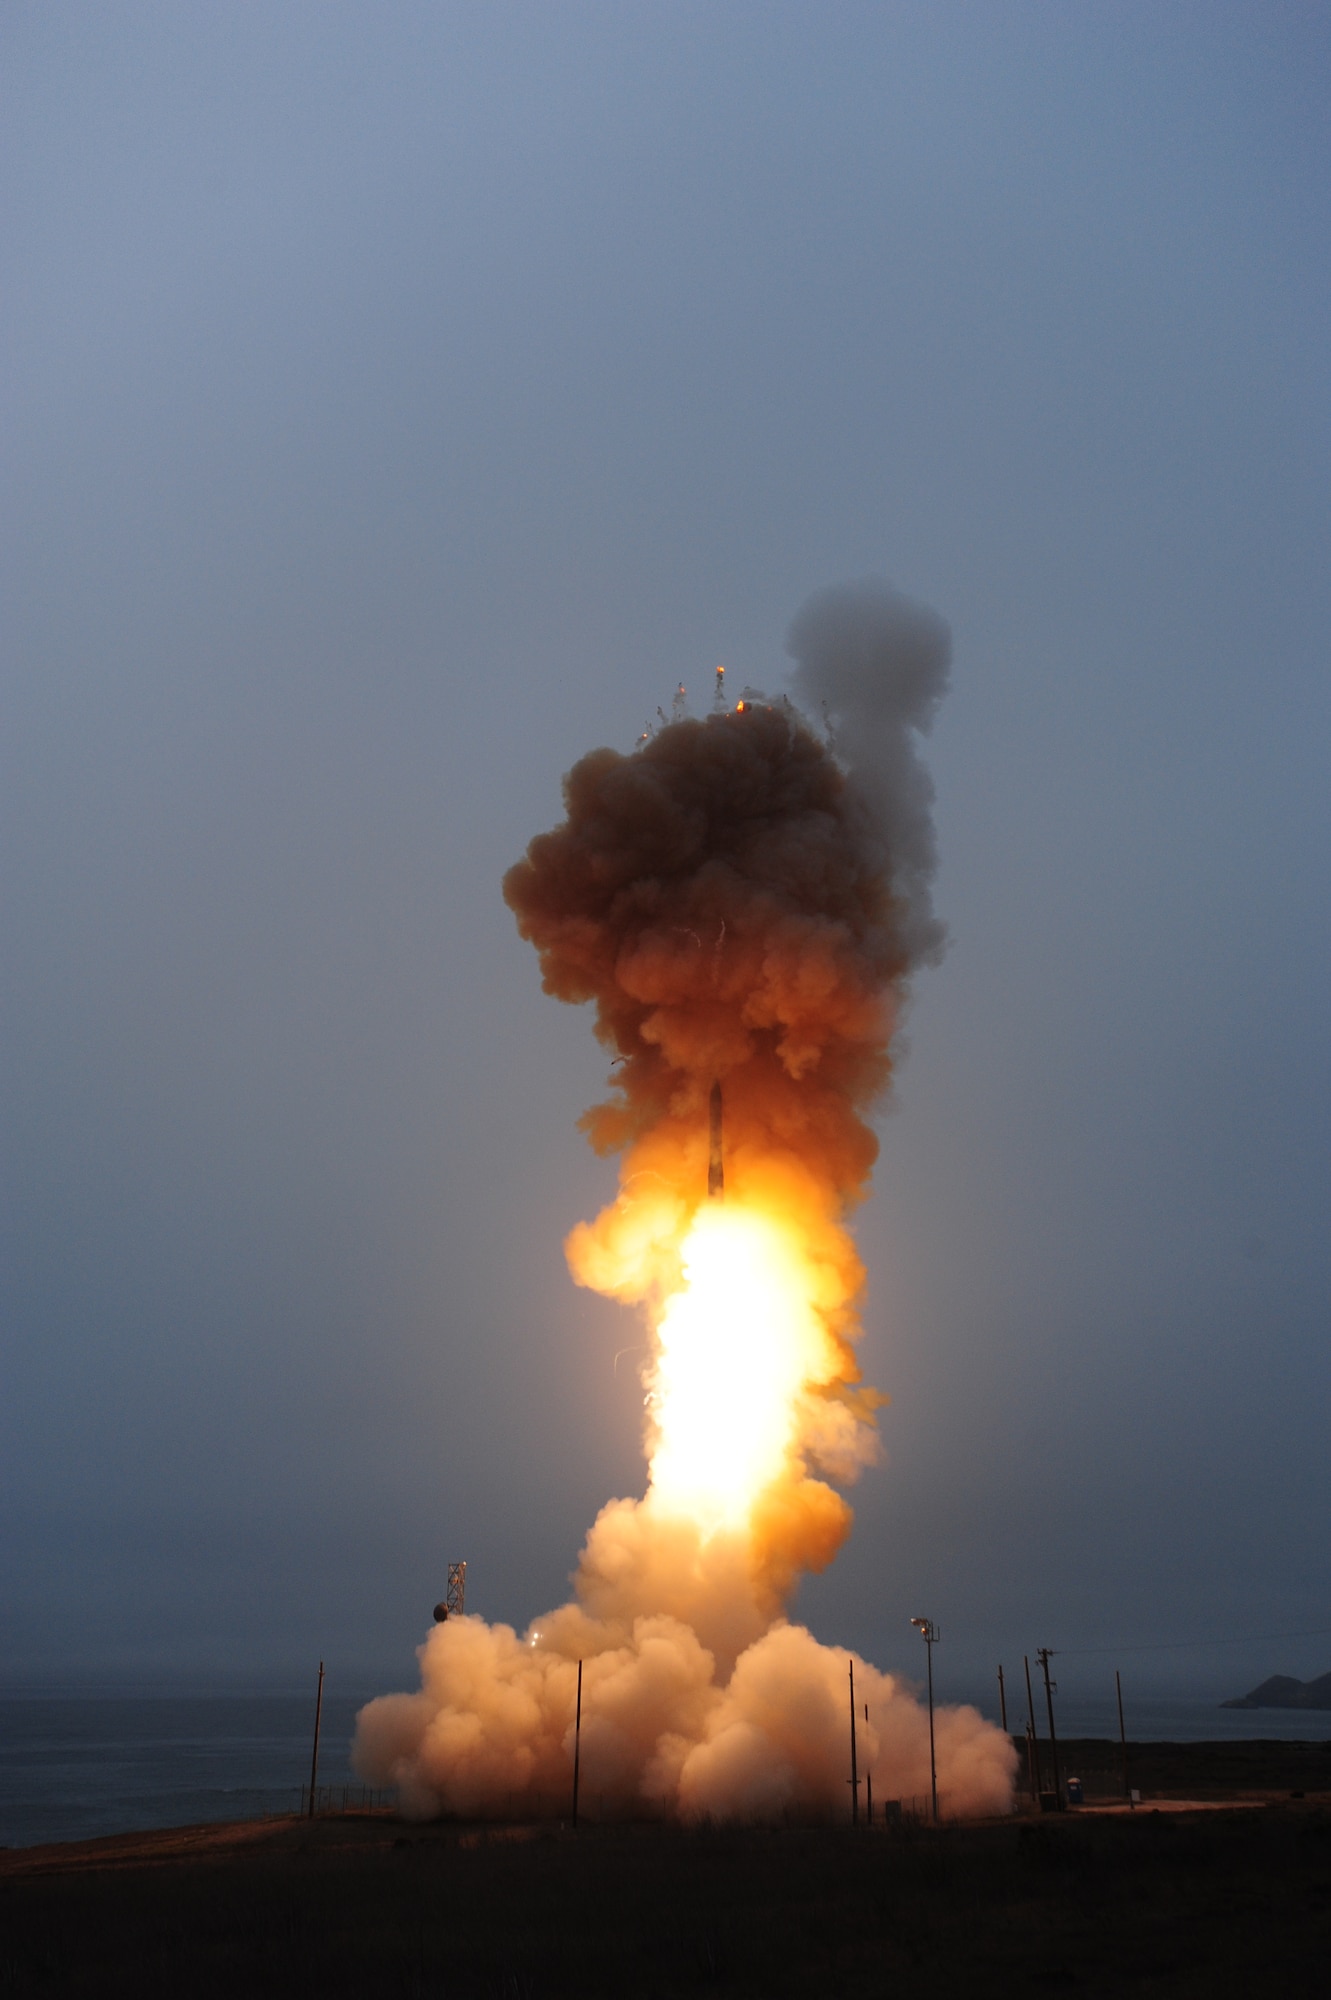 An unarmed Minuteman III intercontinental ballistic missile launches during an operational test at Vandenberg Air Force Base, Sep. 23, 2014, at 7:45 a.m. Col. Keith Balts, 30th Space Wing commander, was the launch decision authority. (U.S. Air Force Photo by Joe Davila/Released)